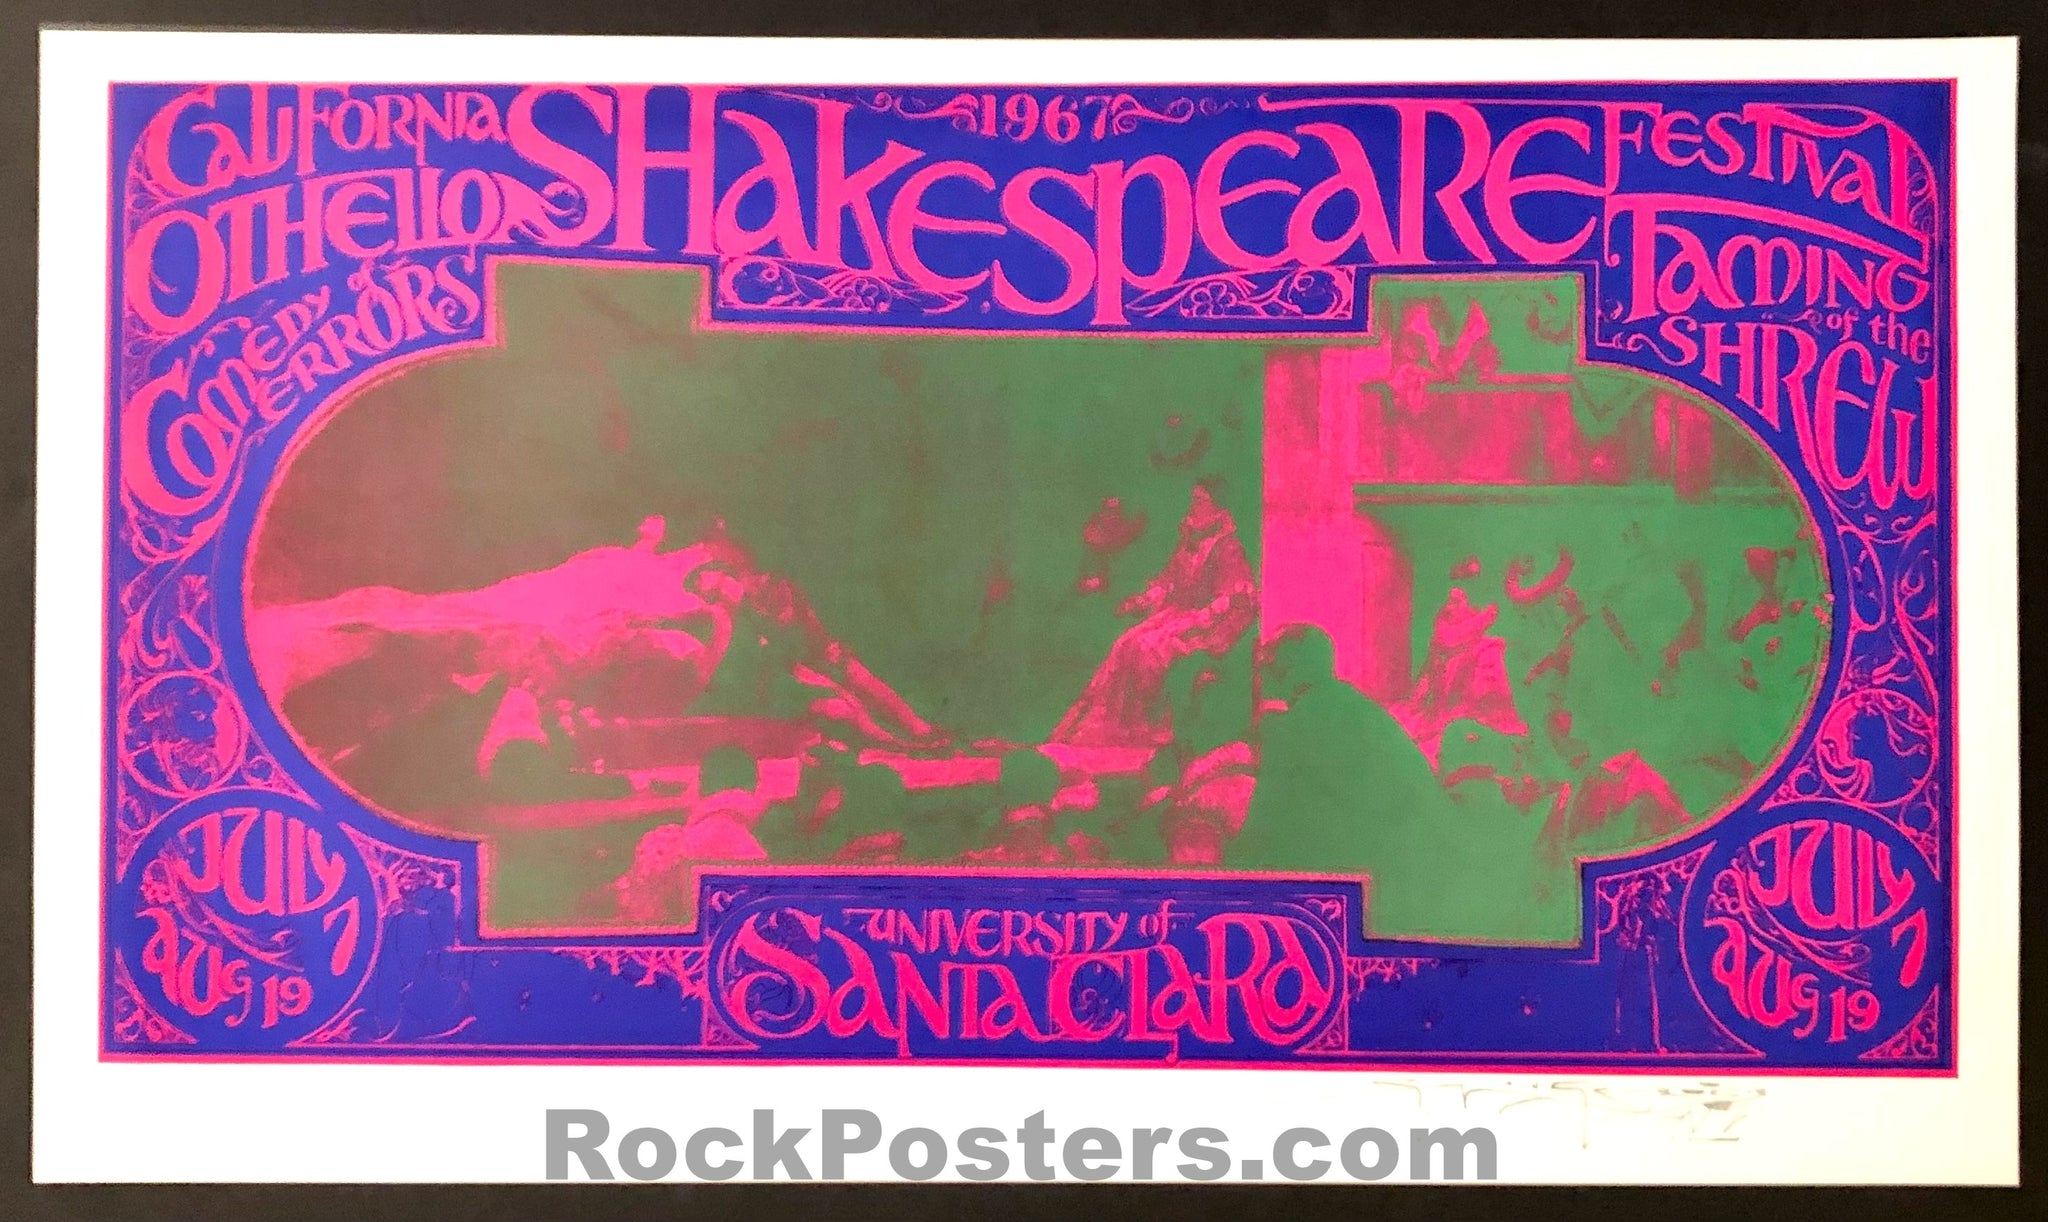 AUCTION - AOR-2.366 - California Shakespeare Festival - Mouse SIGNED - 1967 Poster - Near Mint